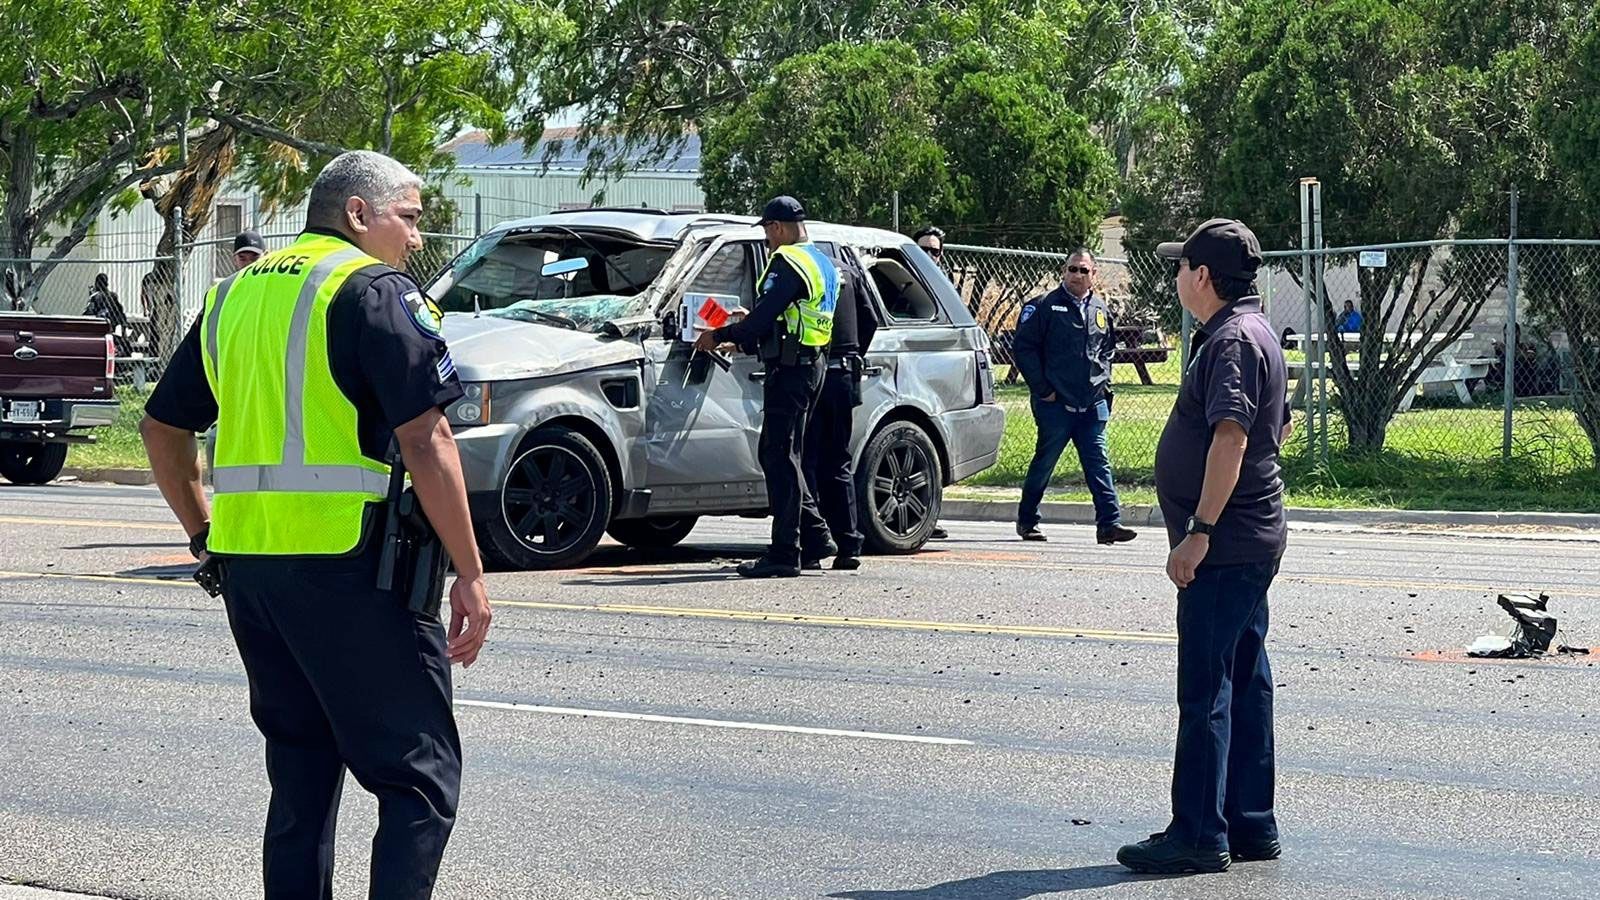 7 killed in head-on crash involving suspected migrant-smuggling vehicle:  Texas DPS - ABC News